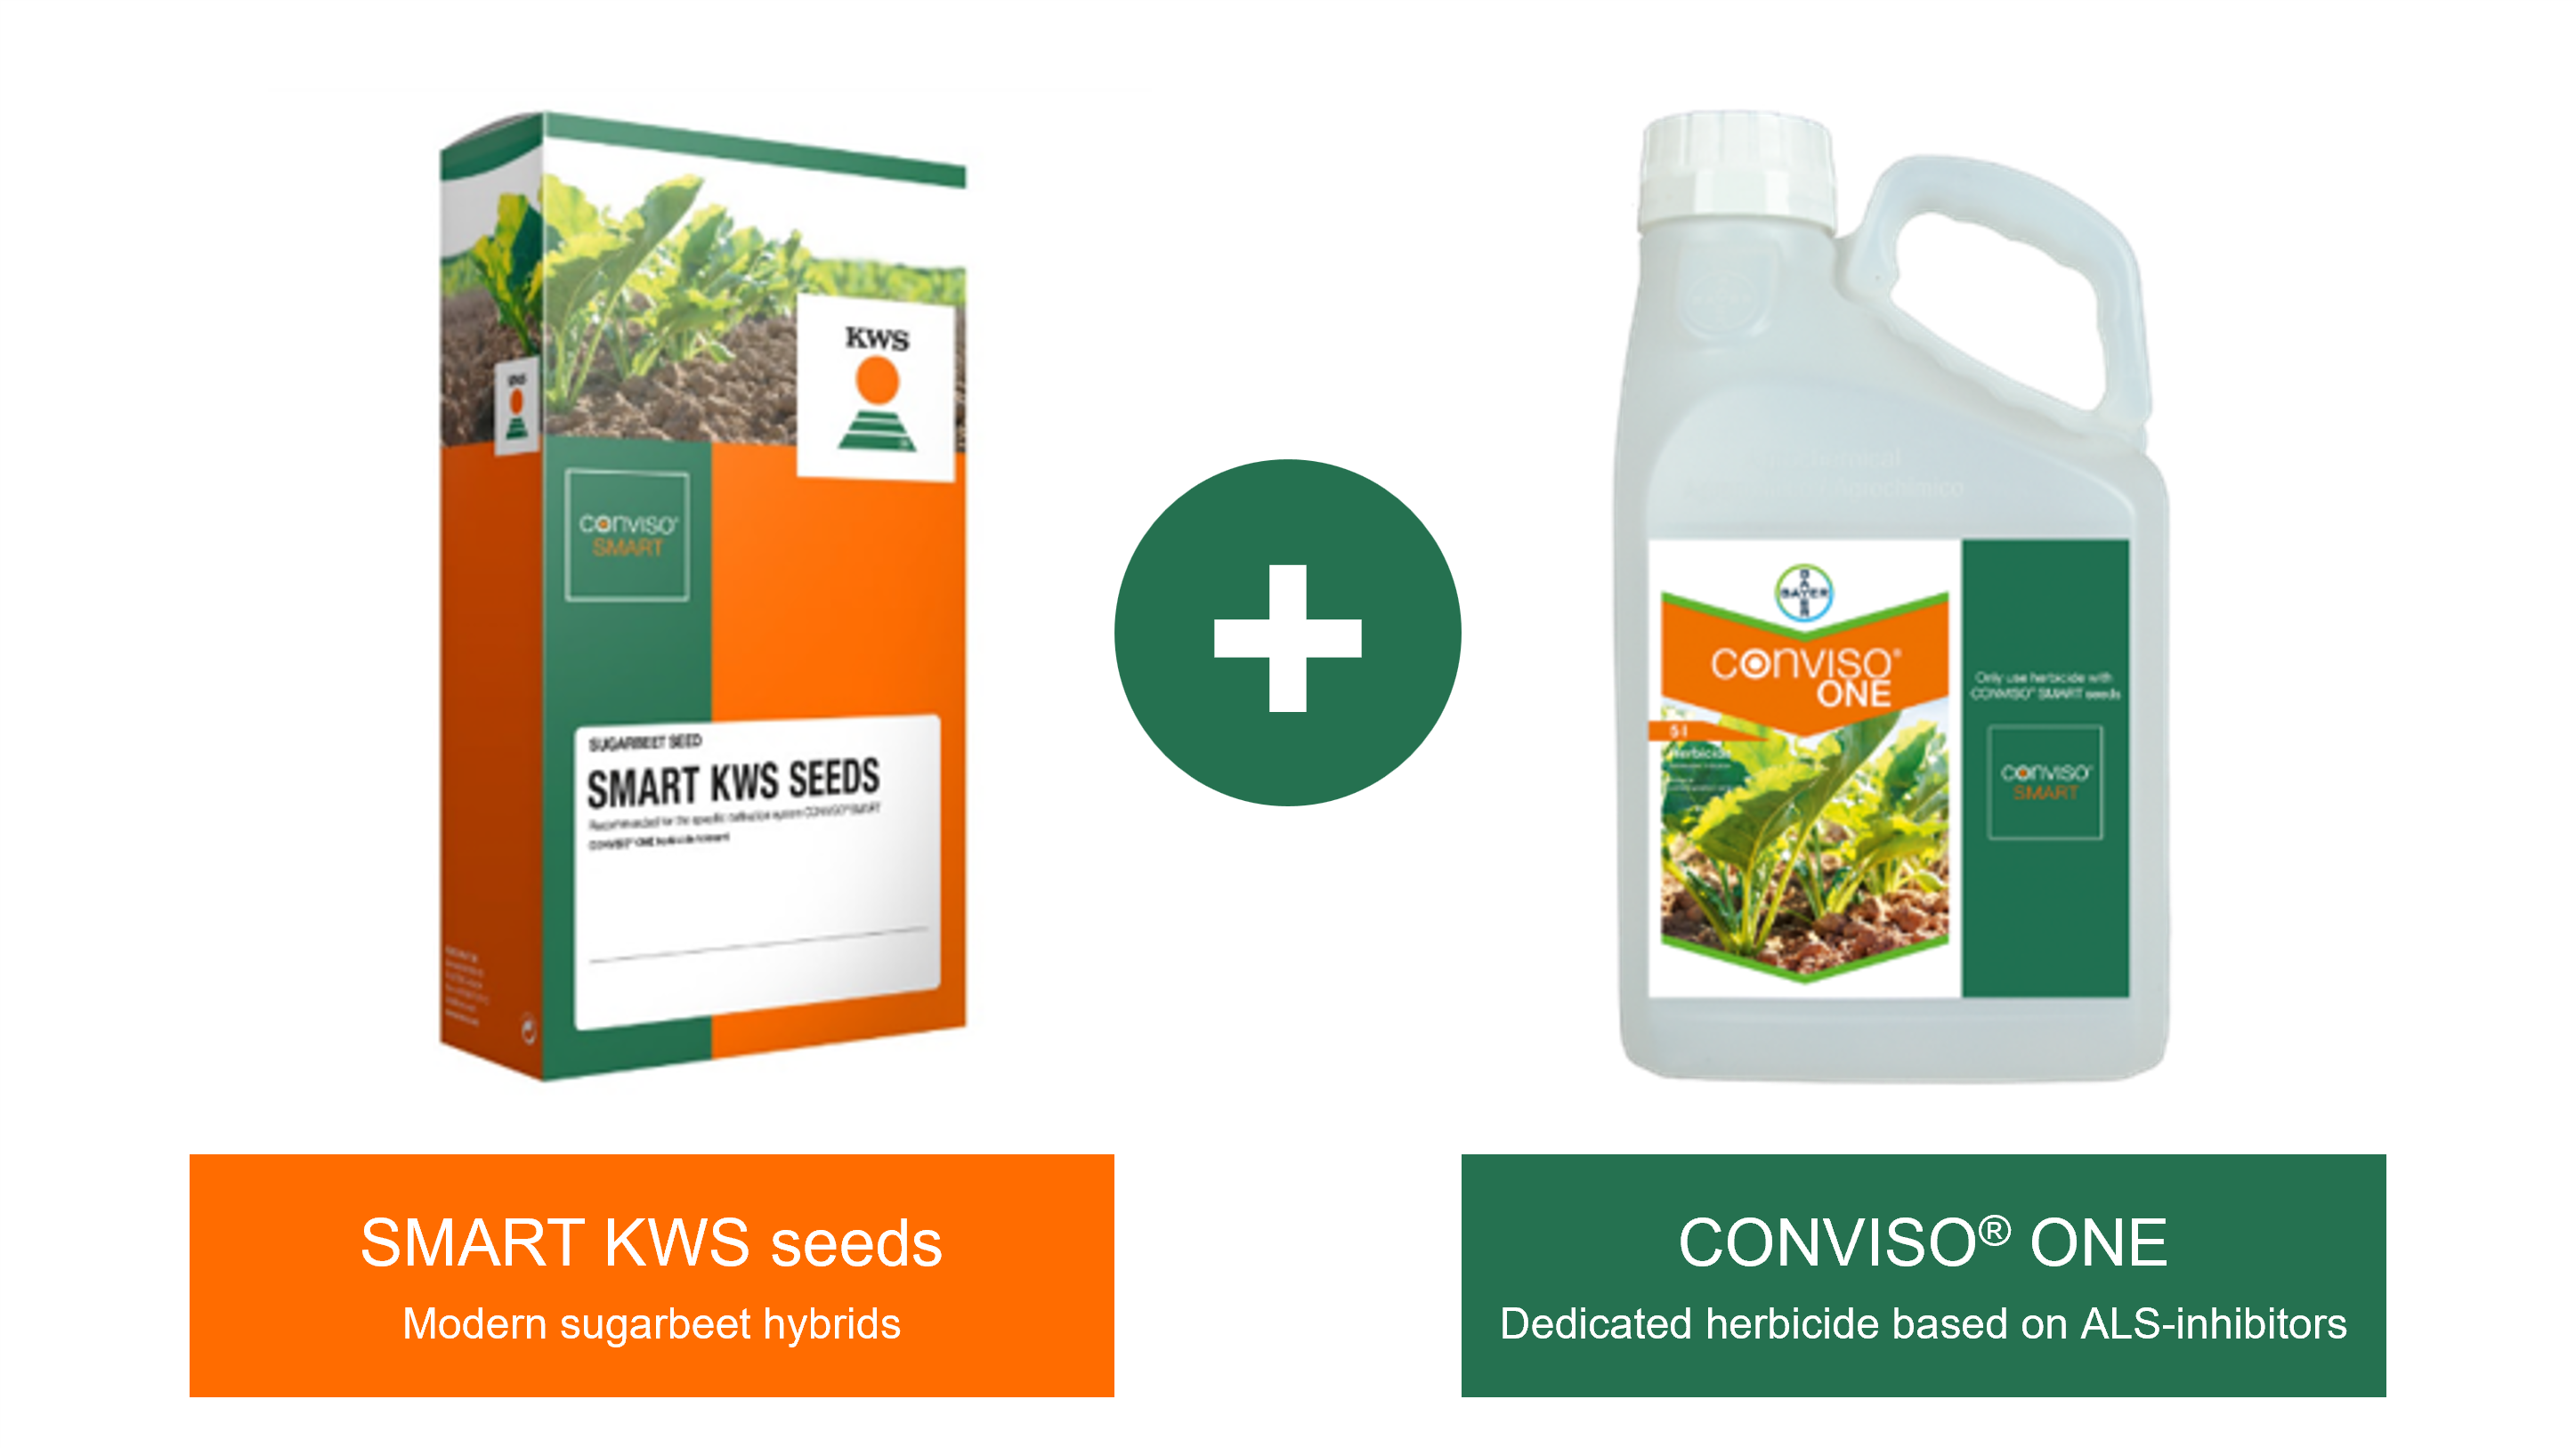 SMART-KWS-seeds_CONVISO-ONE-herbicide.png